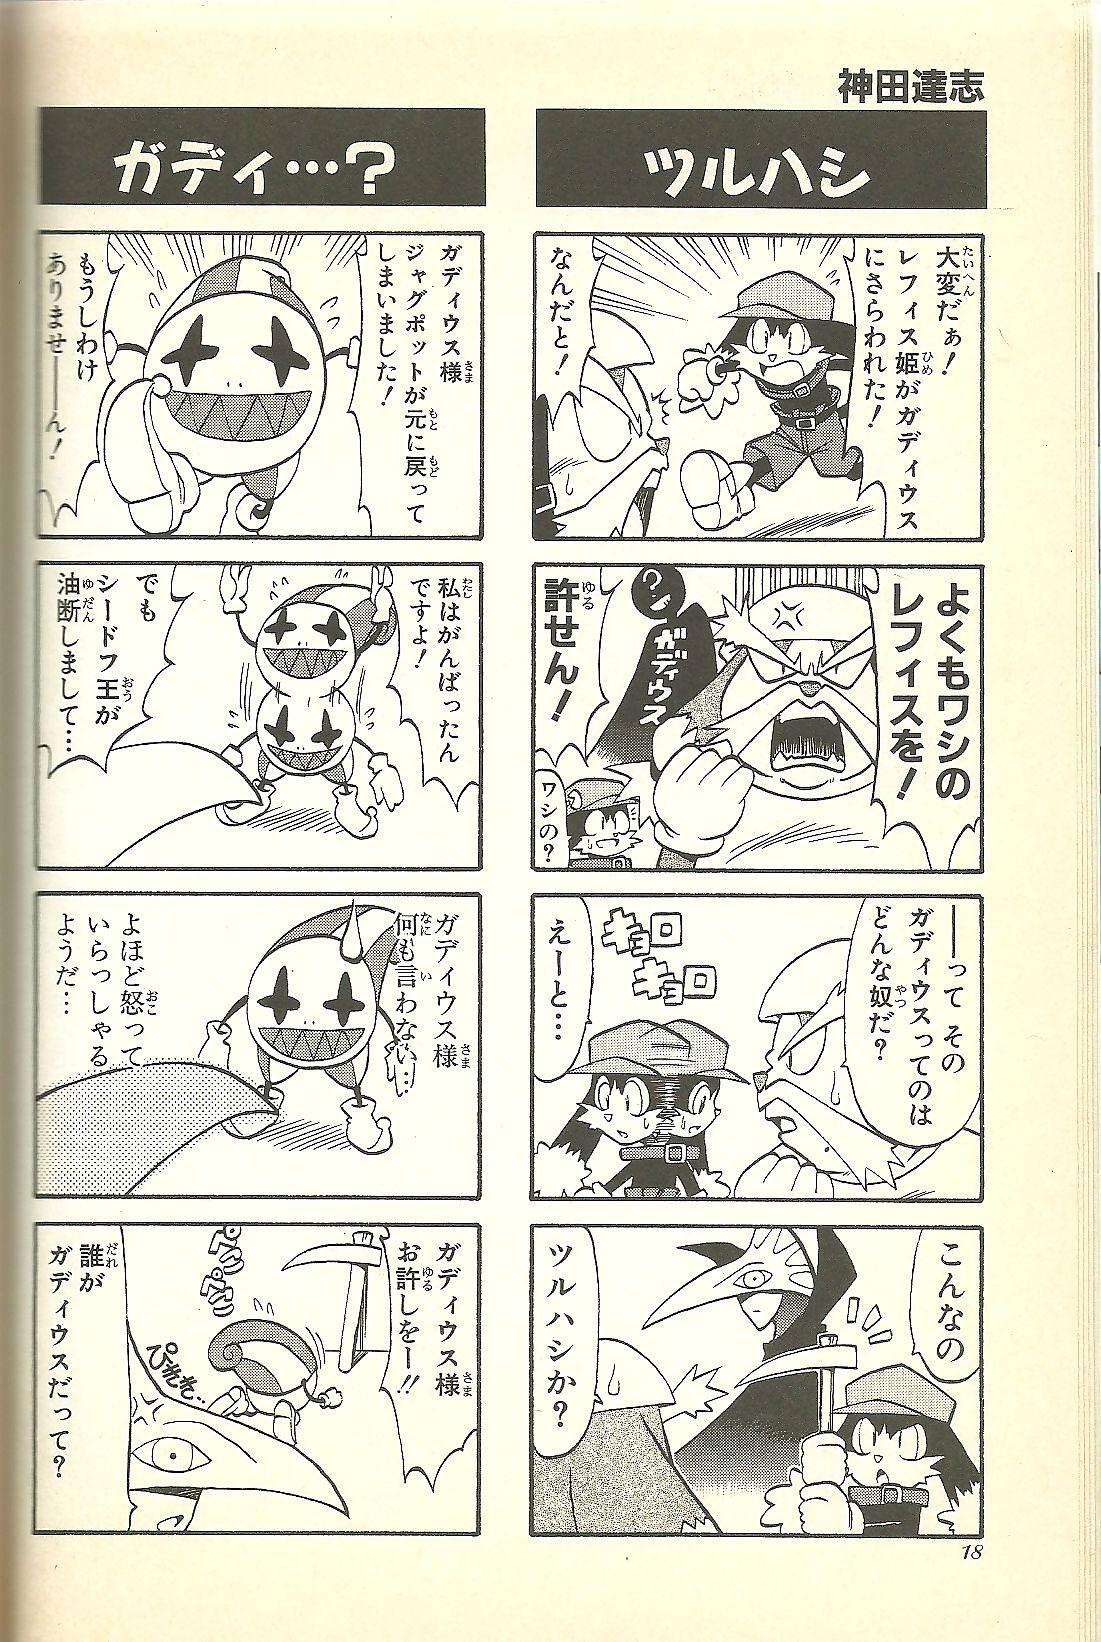 Klonoa of the Wind: Four Cell Manga Theatre - part 2